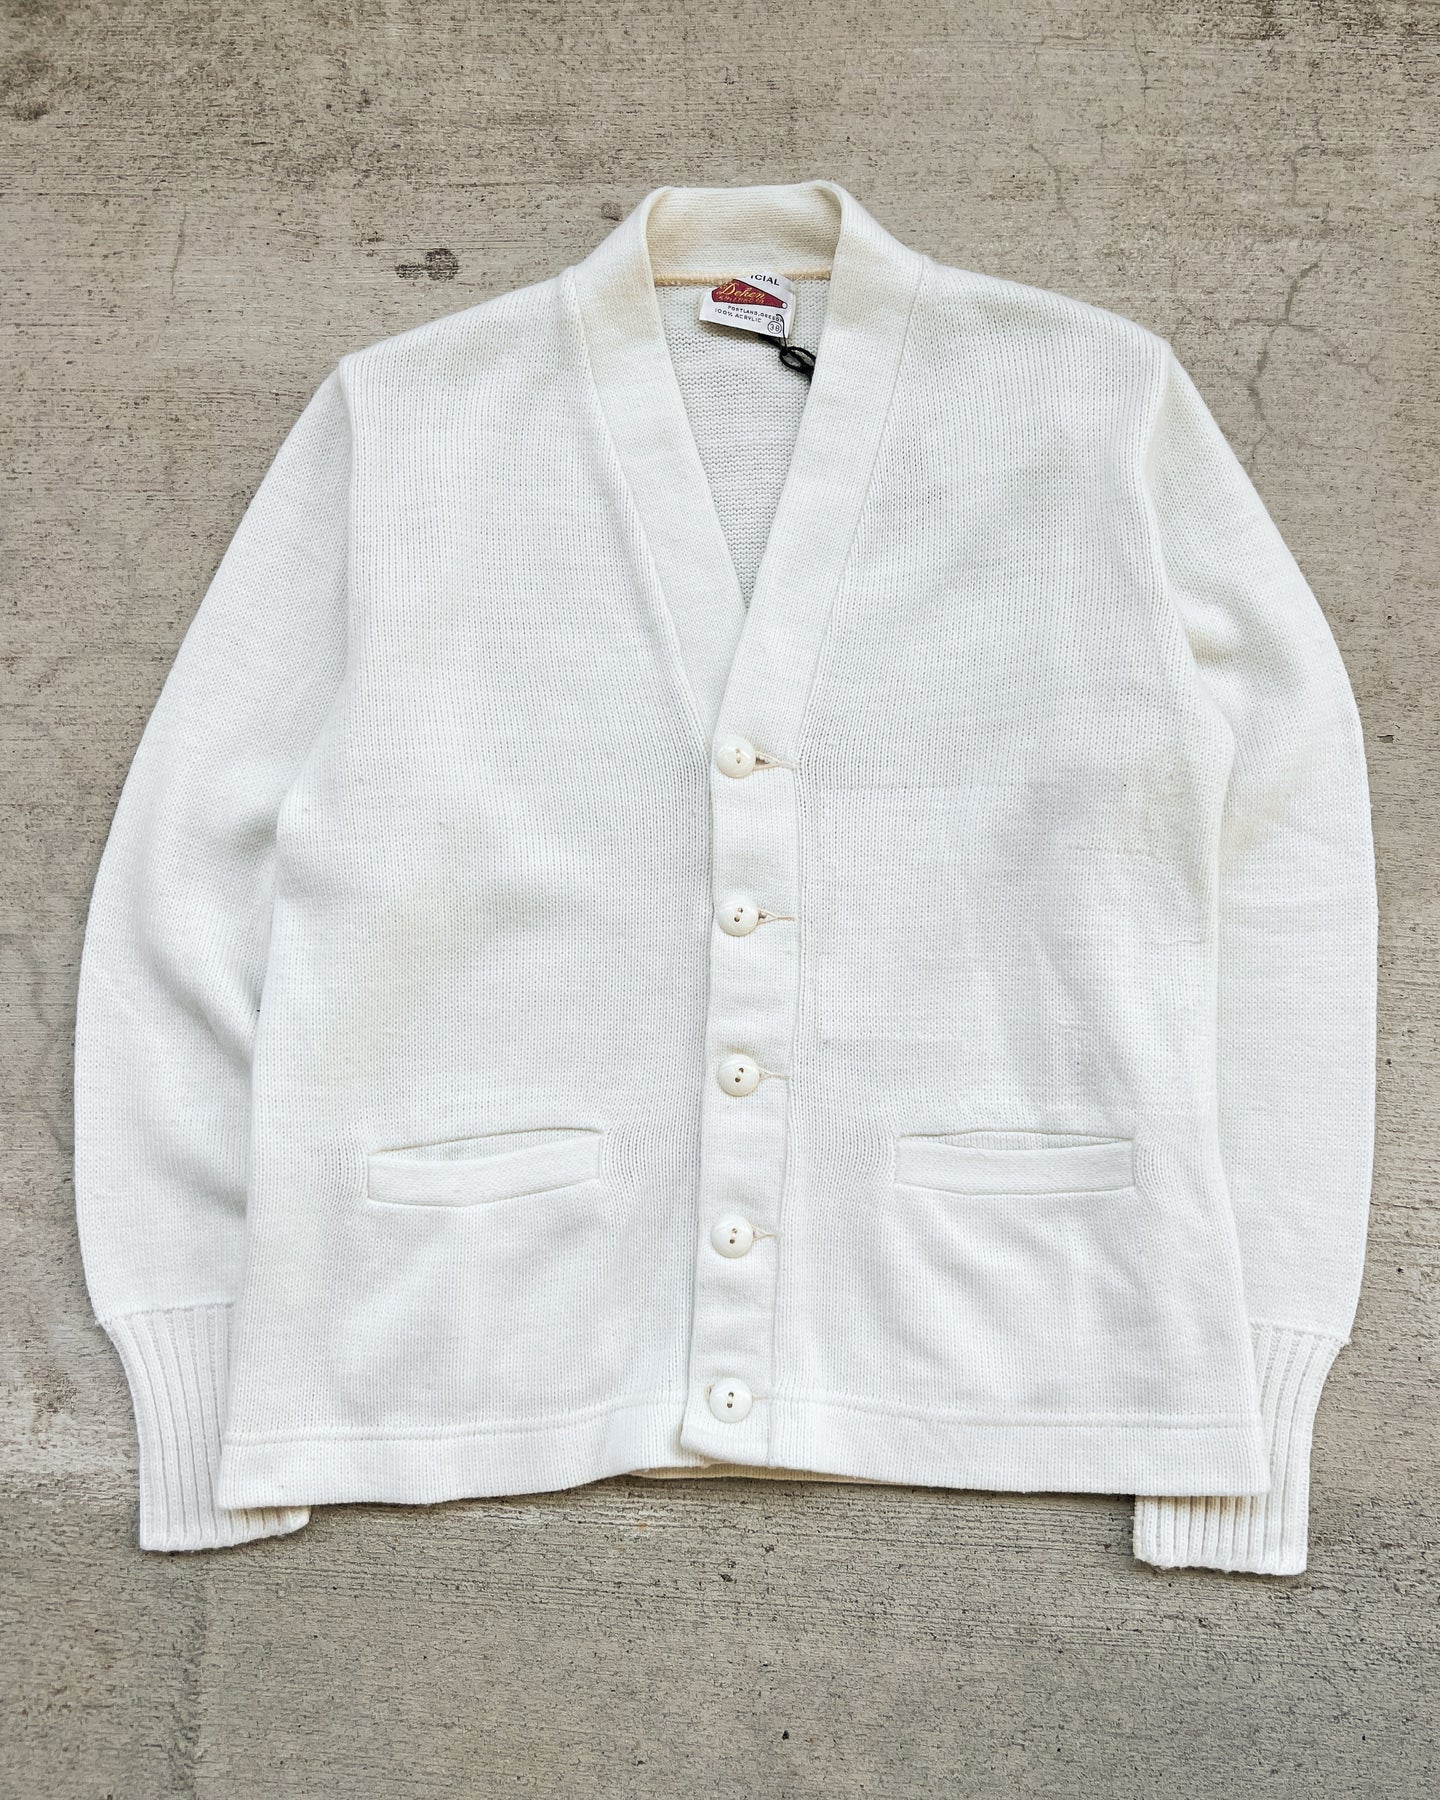 1960s Cream Knit Button Up Sweater Cardigan - Size Large